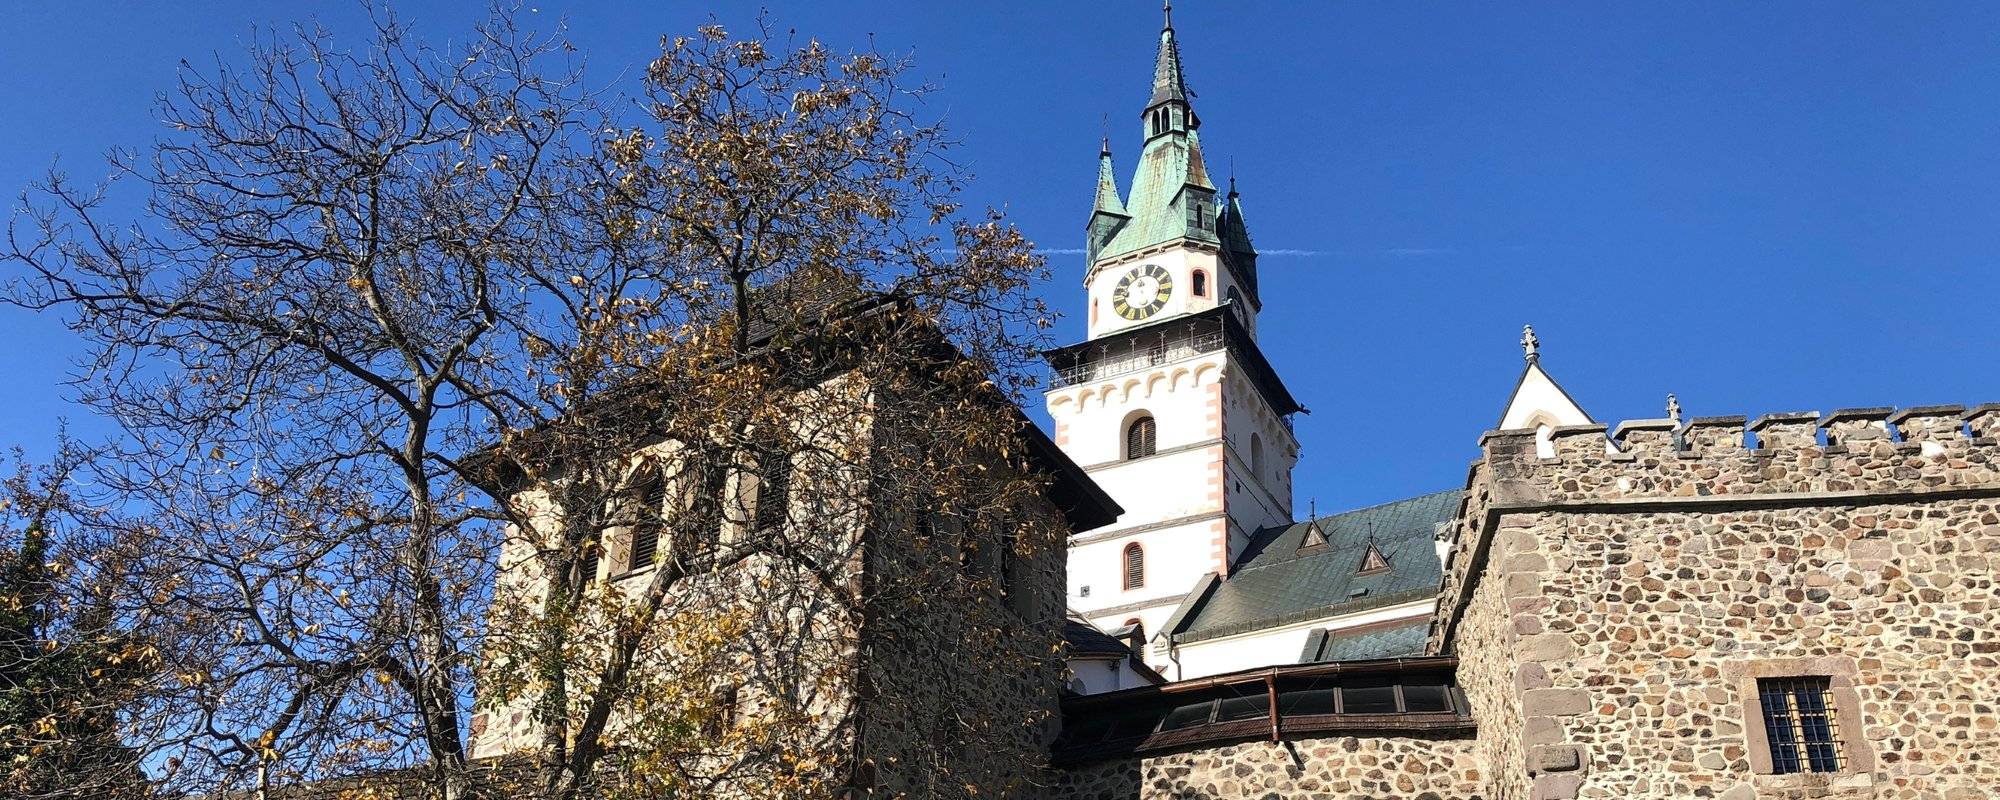 Traveling the World #148 - The Church of St. Catherine @ Kremnica, Slovakia